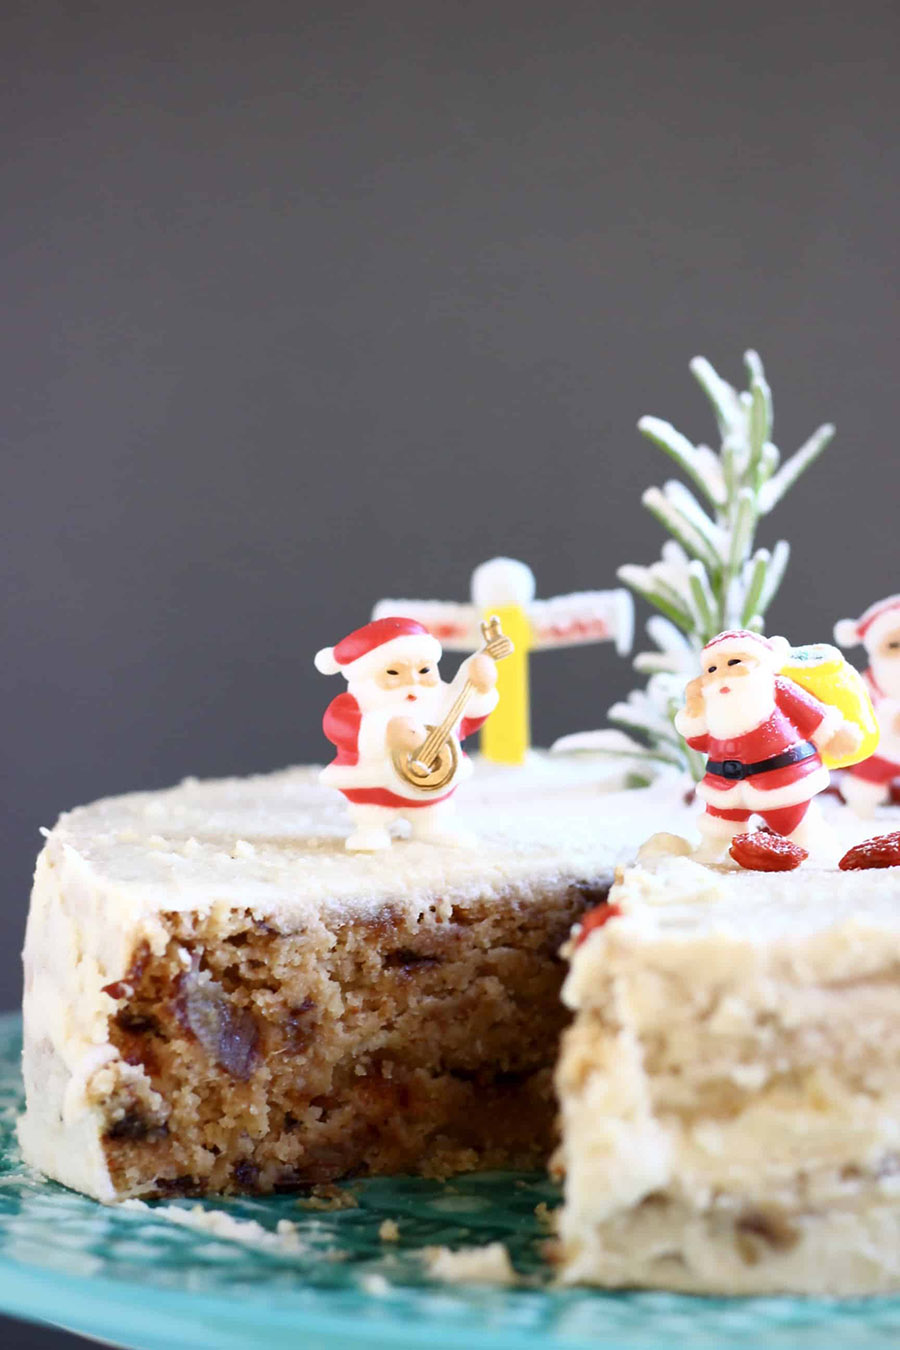 A closeup of an iced fruitcake decorated with miniature santa figurines and dusted with powdered sugar.